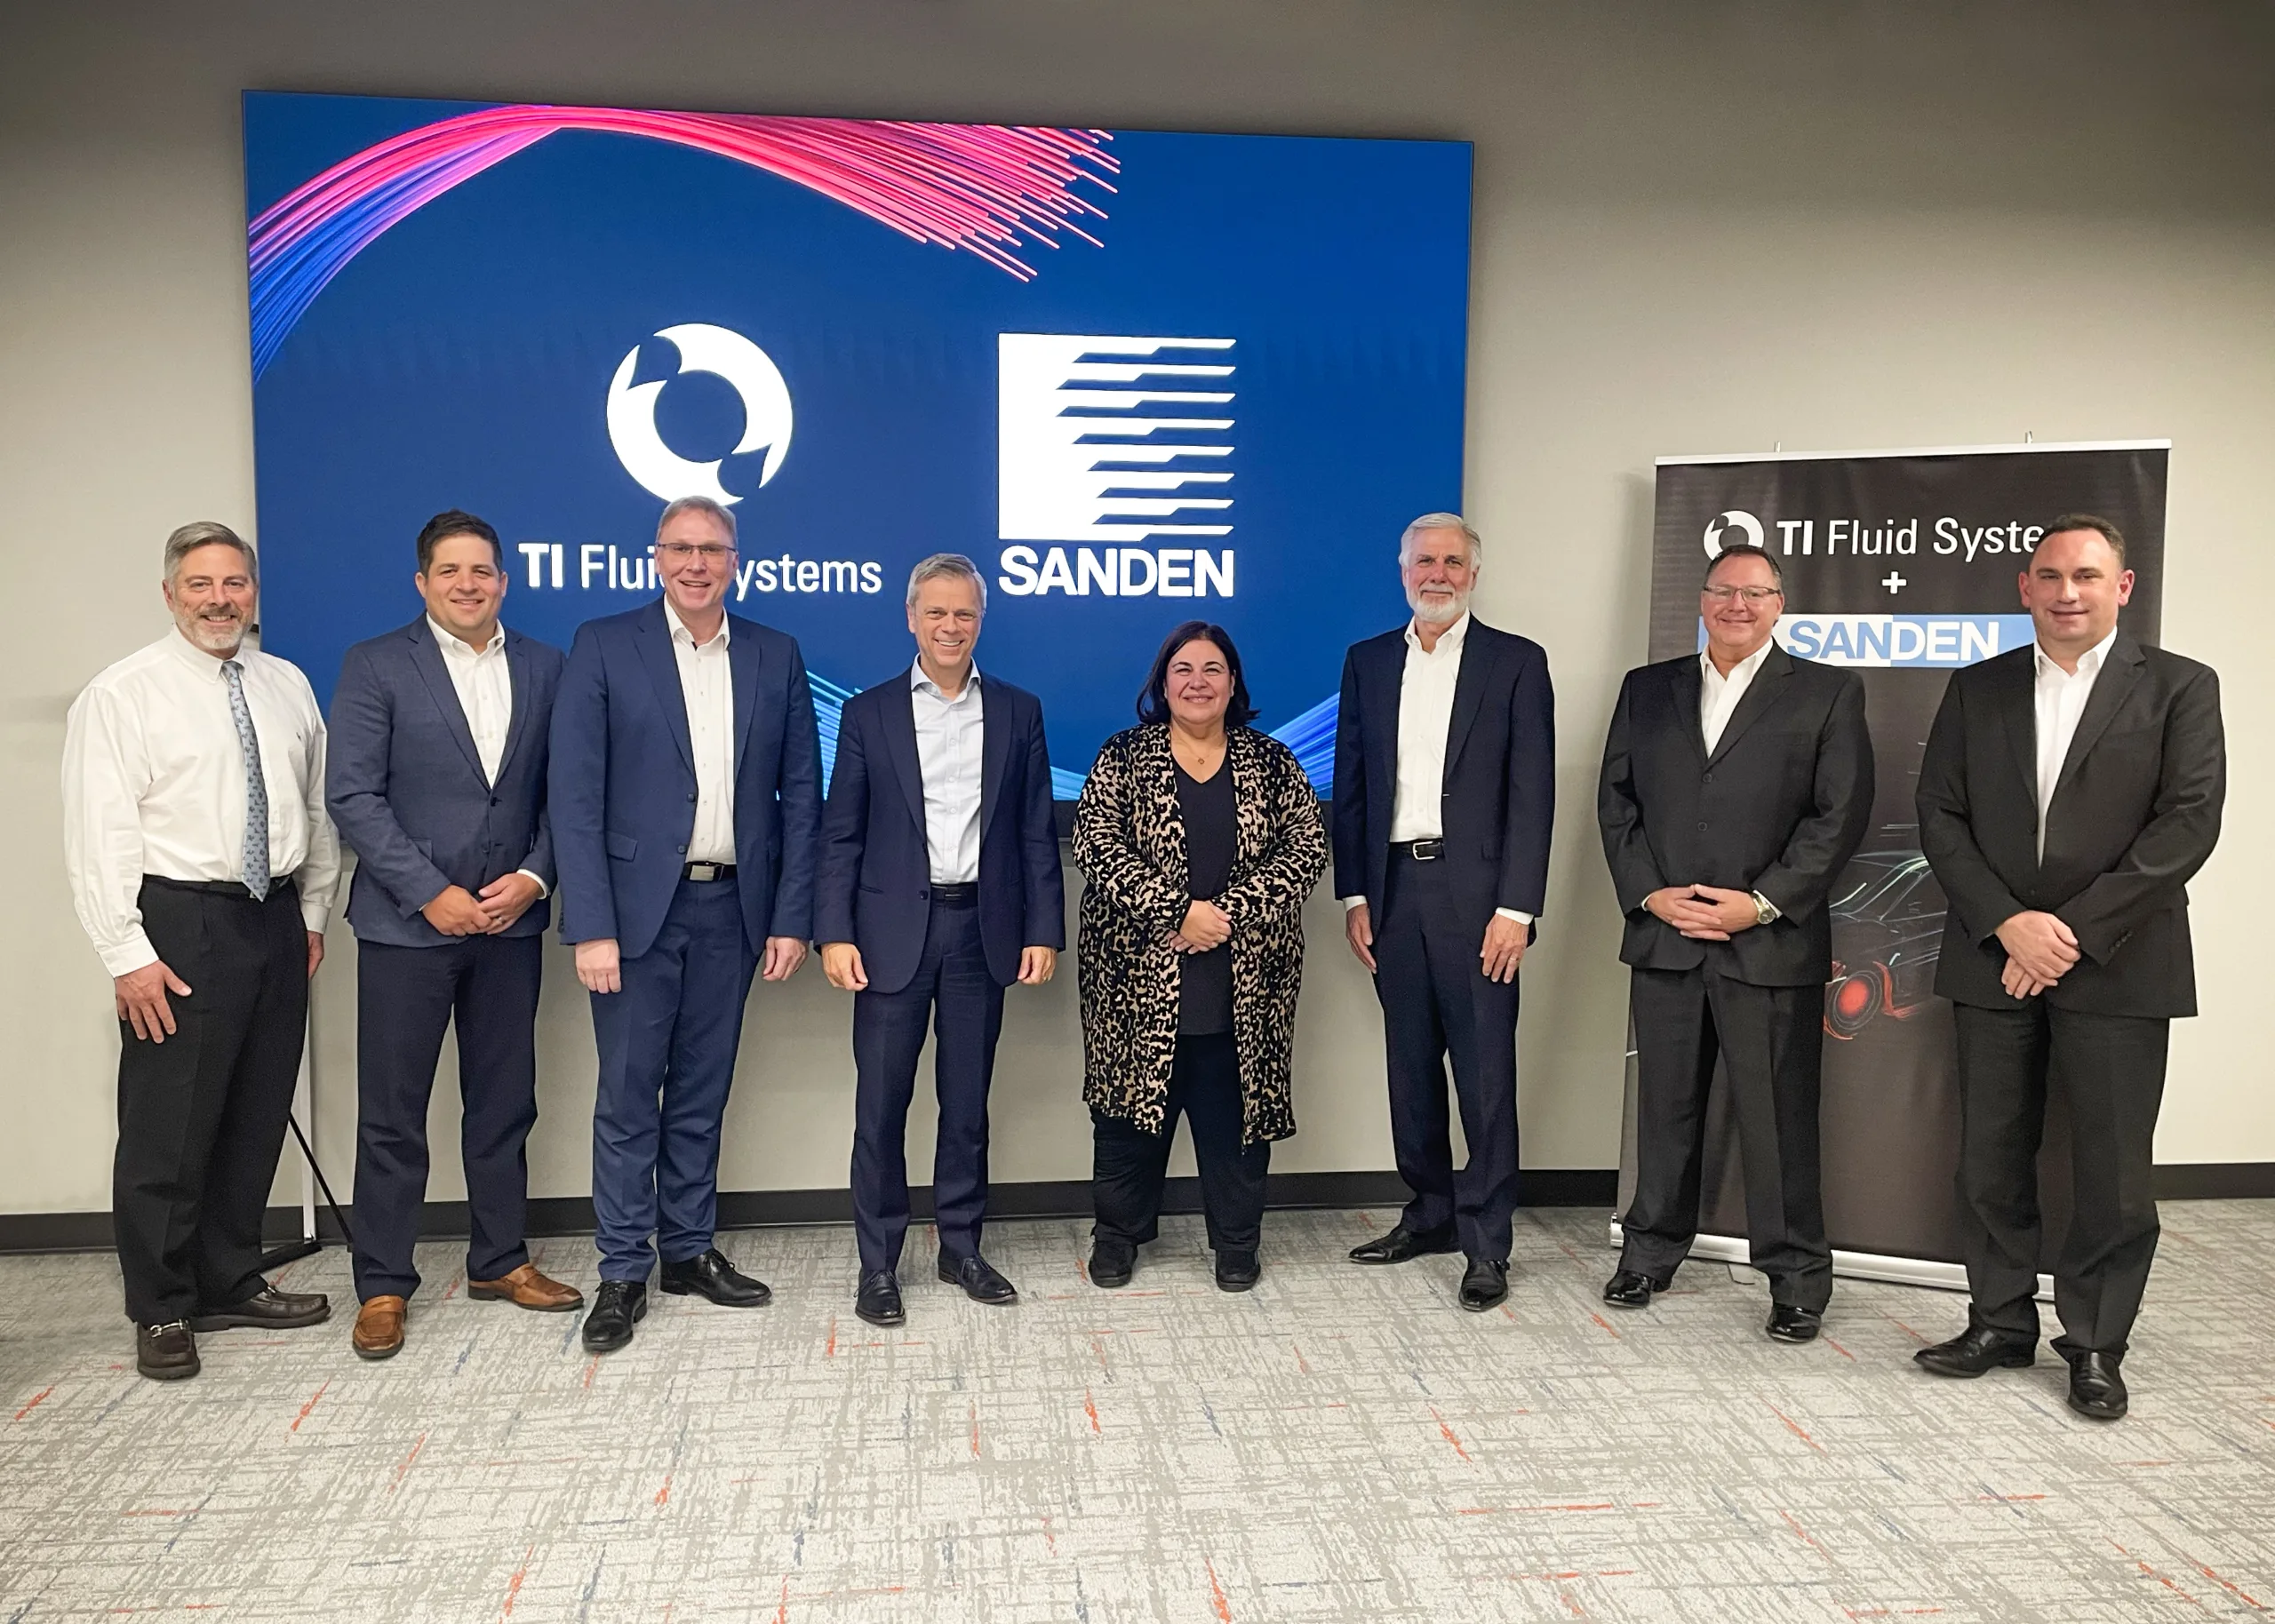 TI Fluid Systems Announces Collaboration with Sanden to Accelerate Next Generation Thermal Refrigerant Modules